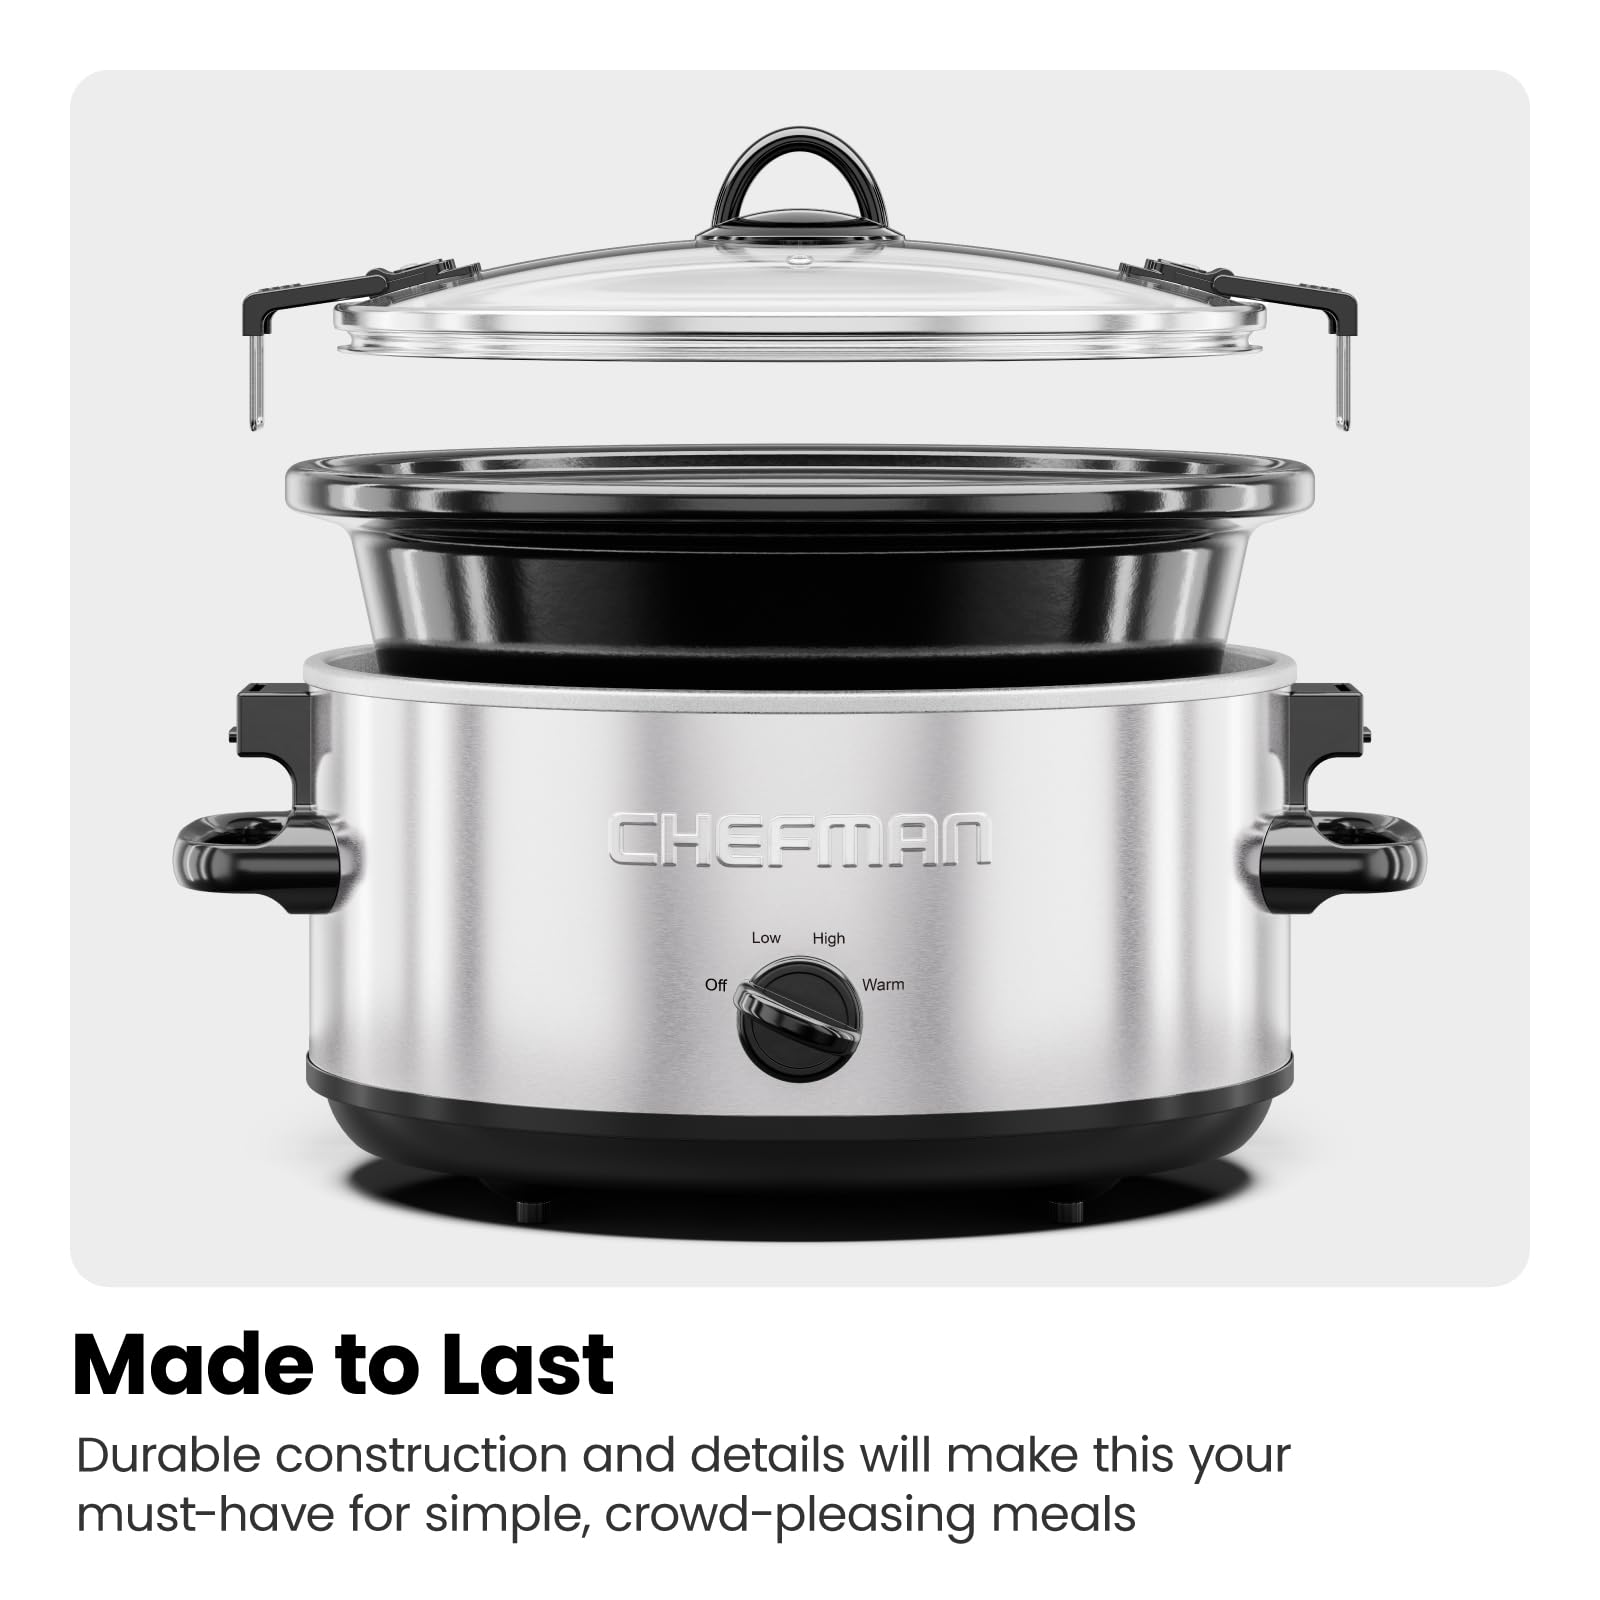 Chefman 6 Quart Slow Cooker with Locking Lid, Ceramic Crock with Portable Cook and Carry Travel Latching Lock, Large Easy Clean Dishwasher Safe Pot Insert, Manual 3 Heat Settings, Stainless Steel